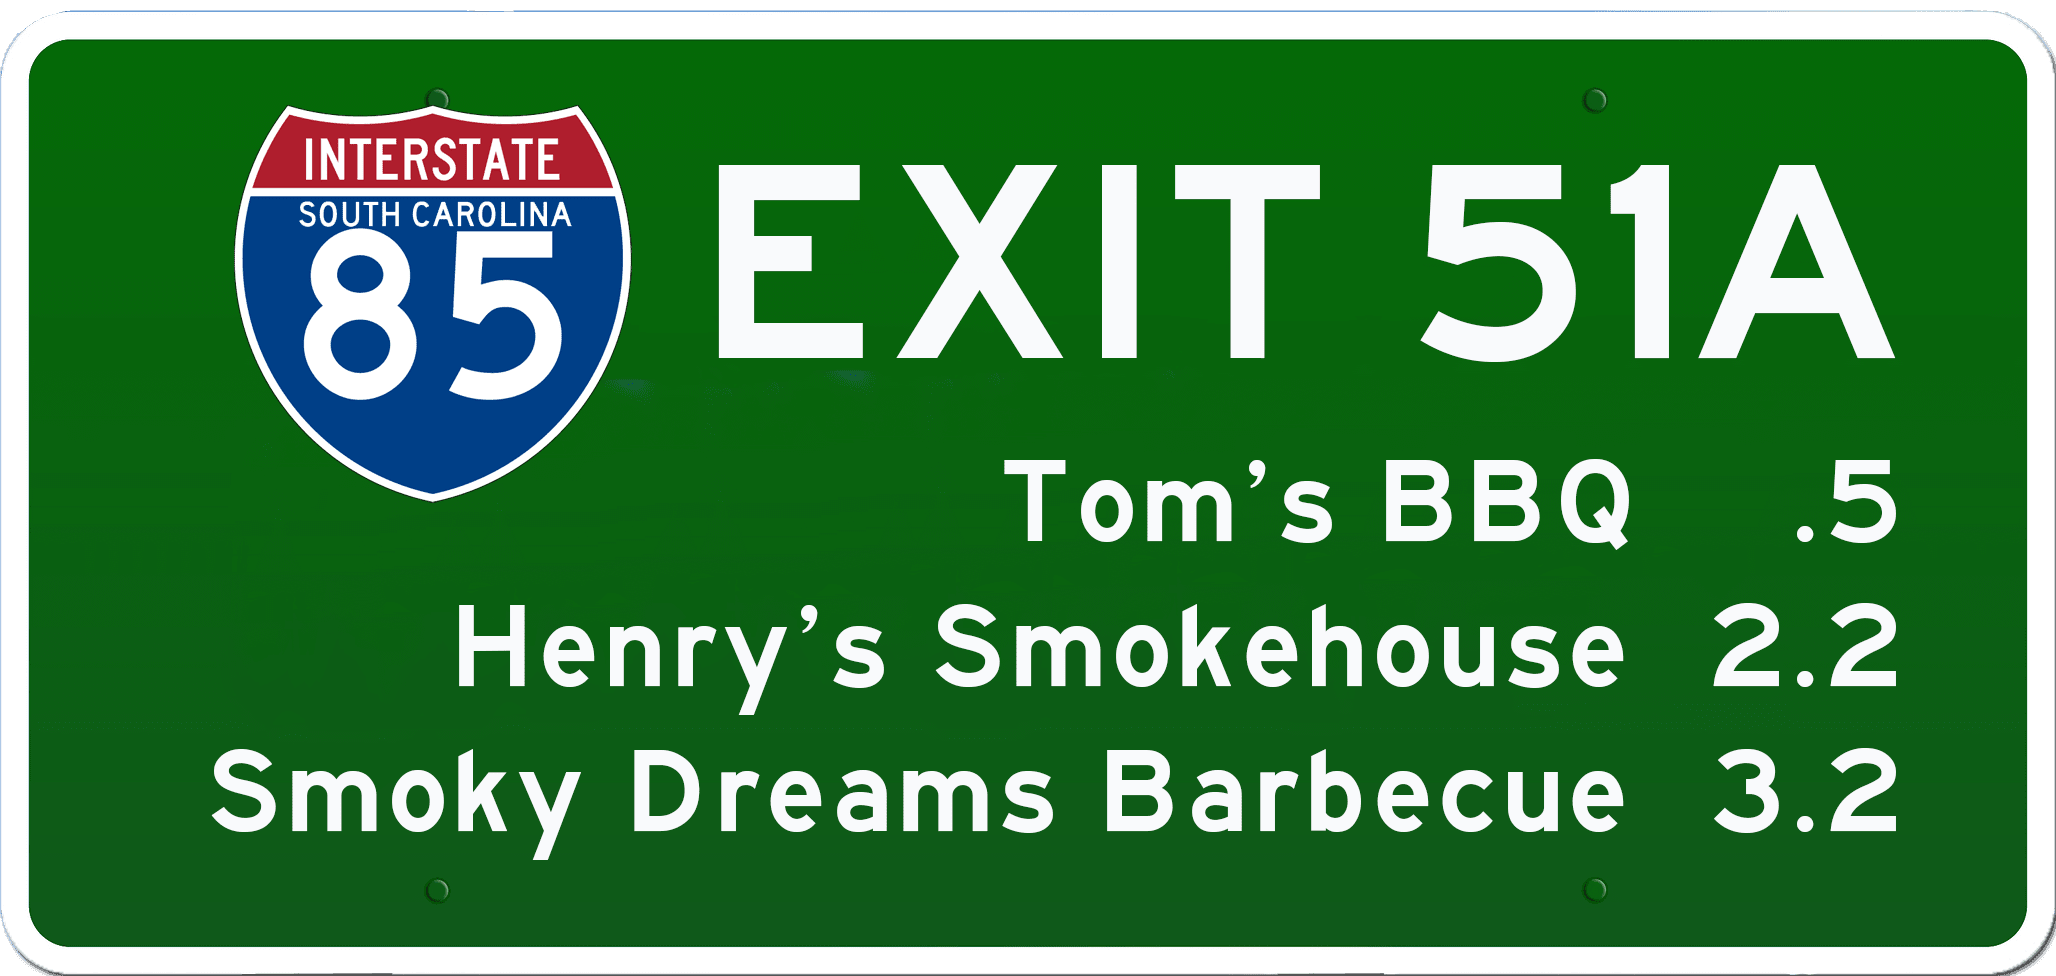 SC BBQ on I-85 at Exit 51A